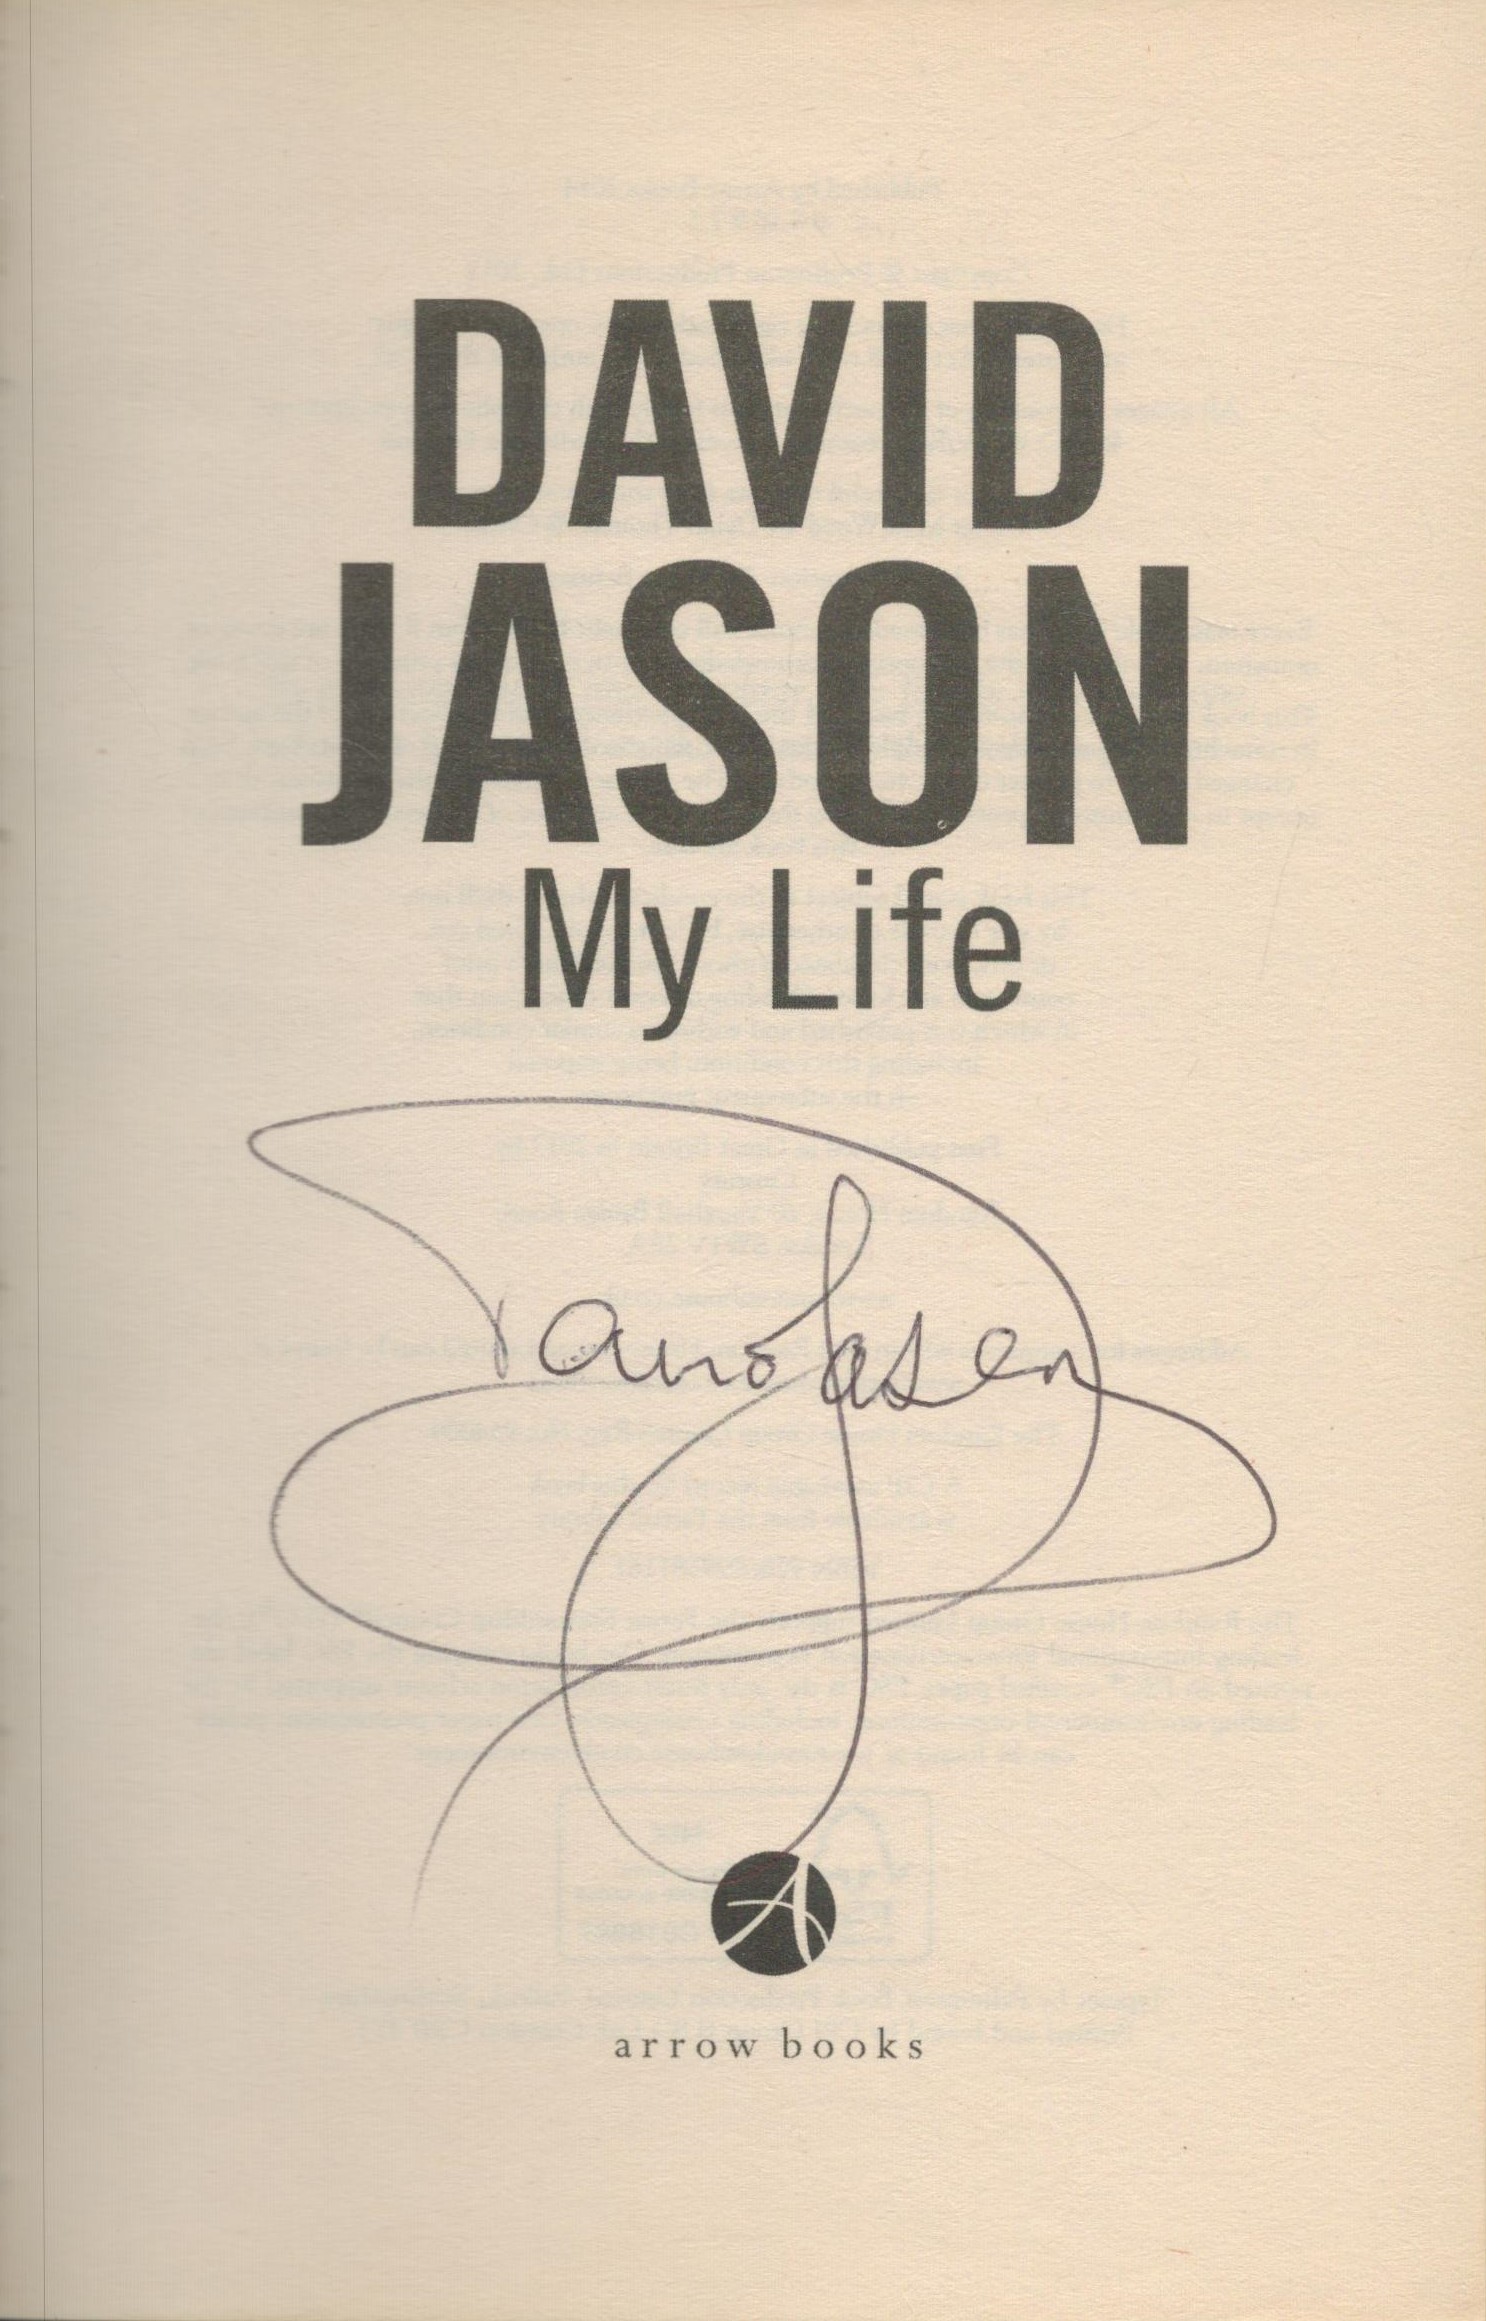 David Jason signed My Life paperback book. Good Condition. All autographs come with a Certificate of - Image 2 of 3